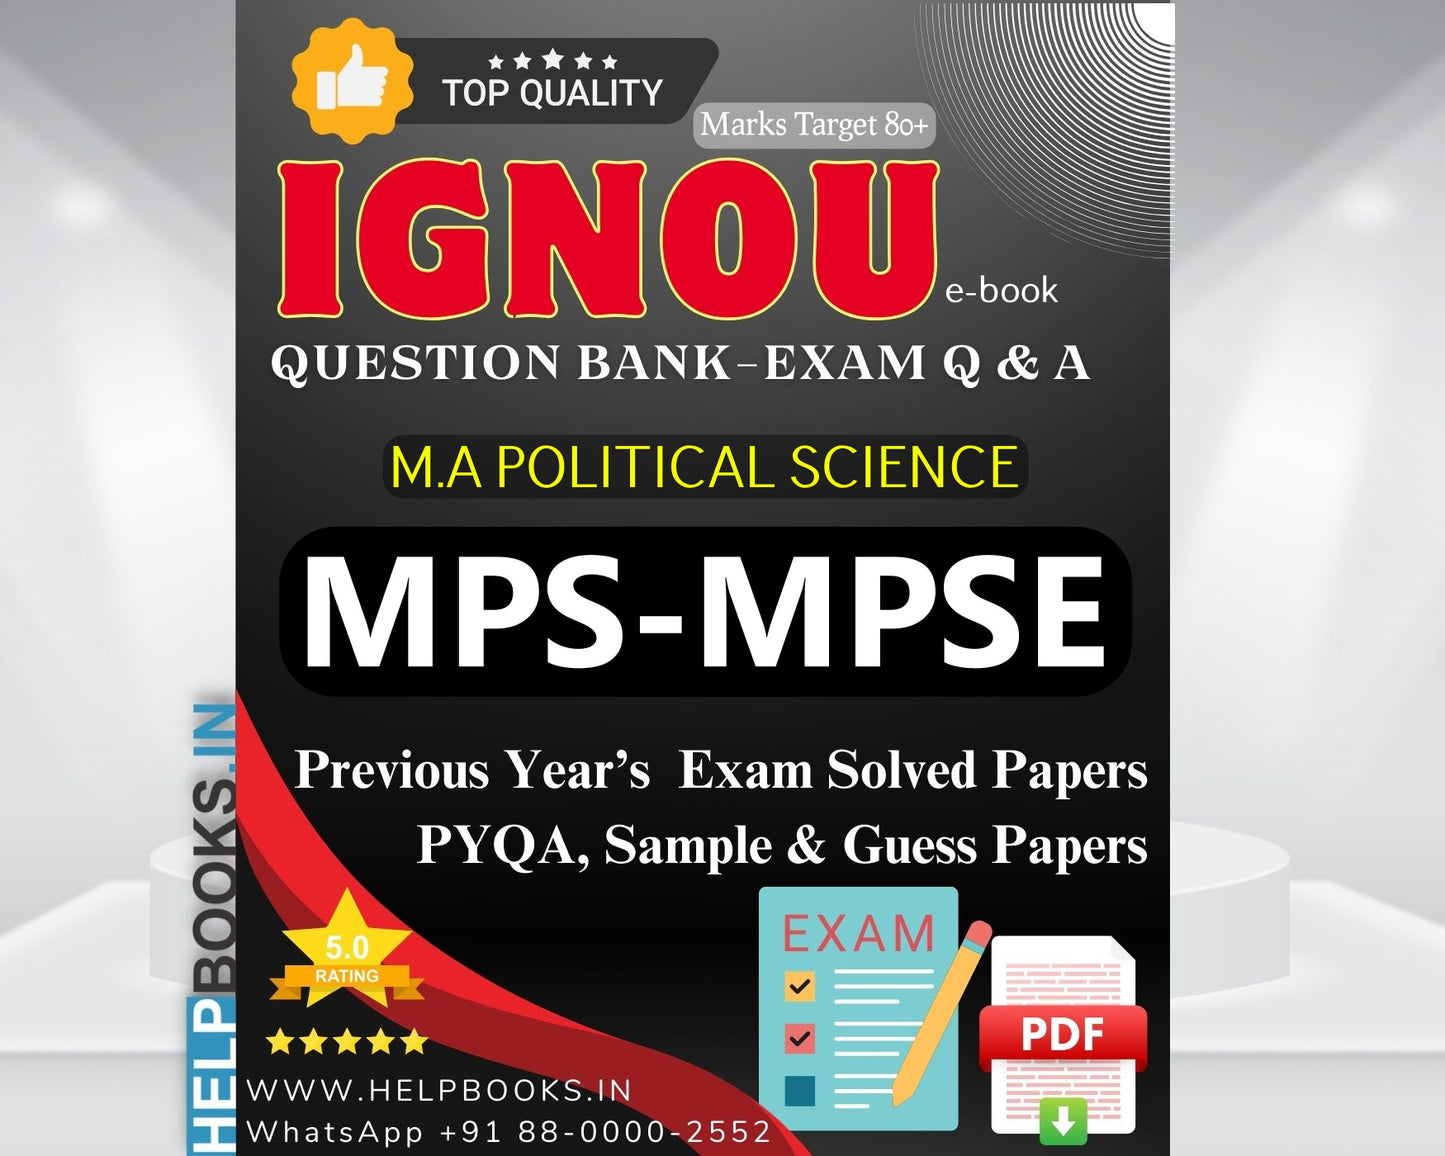 MPS IGNOU Exam Combo of 10 Solved Papers: 5 Previous Years' Solved Papers & 5 Sample Guess Papers for Master of Arts Political Science